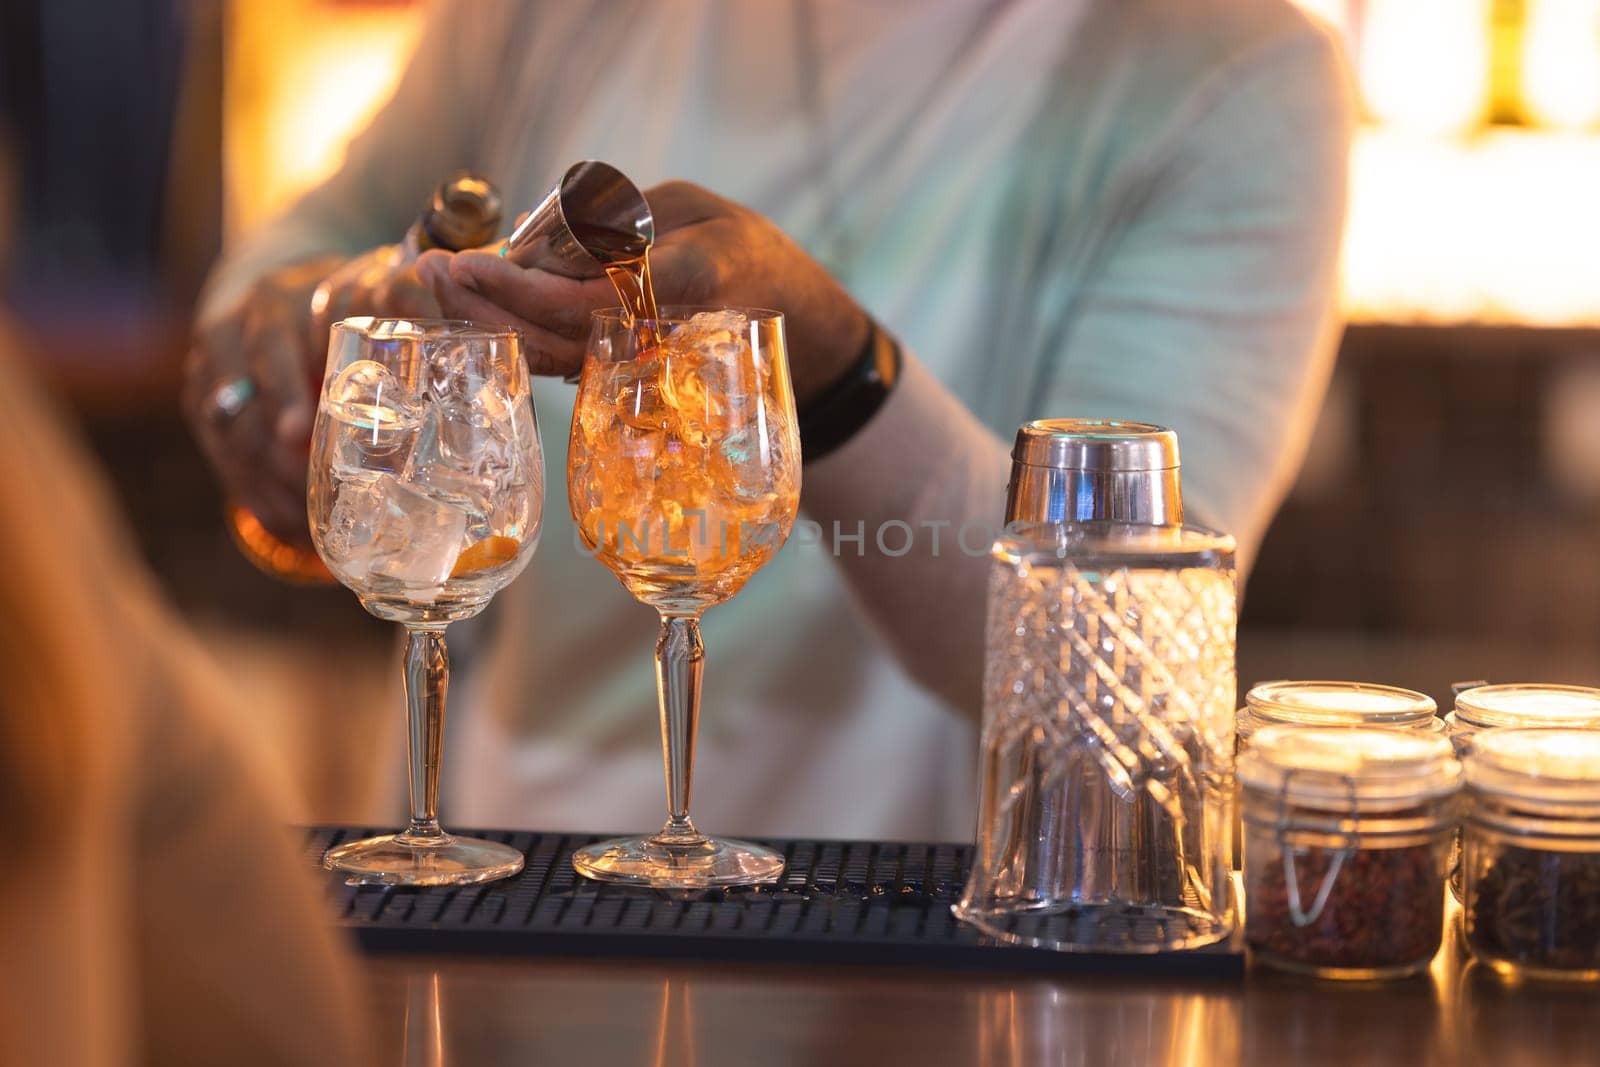 A bartender is pouring a drink into two wine glasses. The glasses are on a bar and there are other glasses and bottles around them. The bartender is wearing a white shirt and a watch